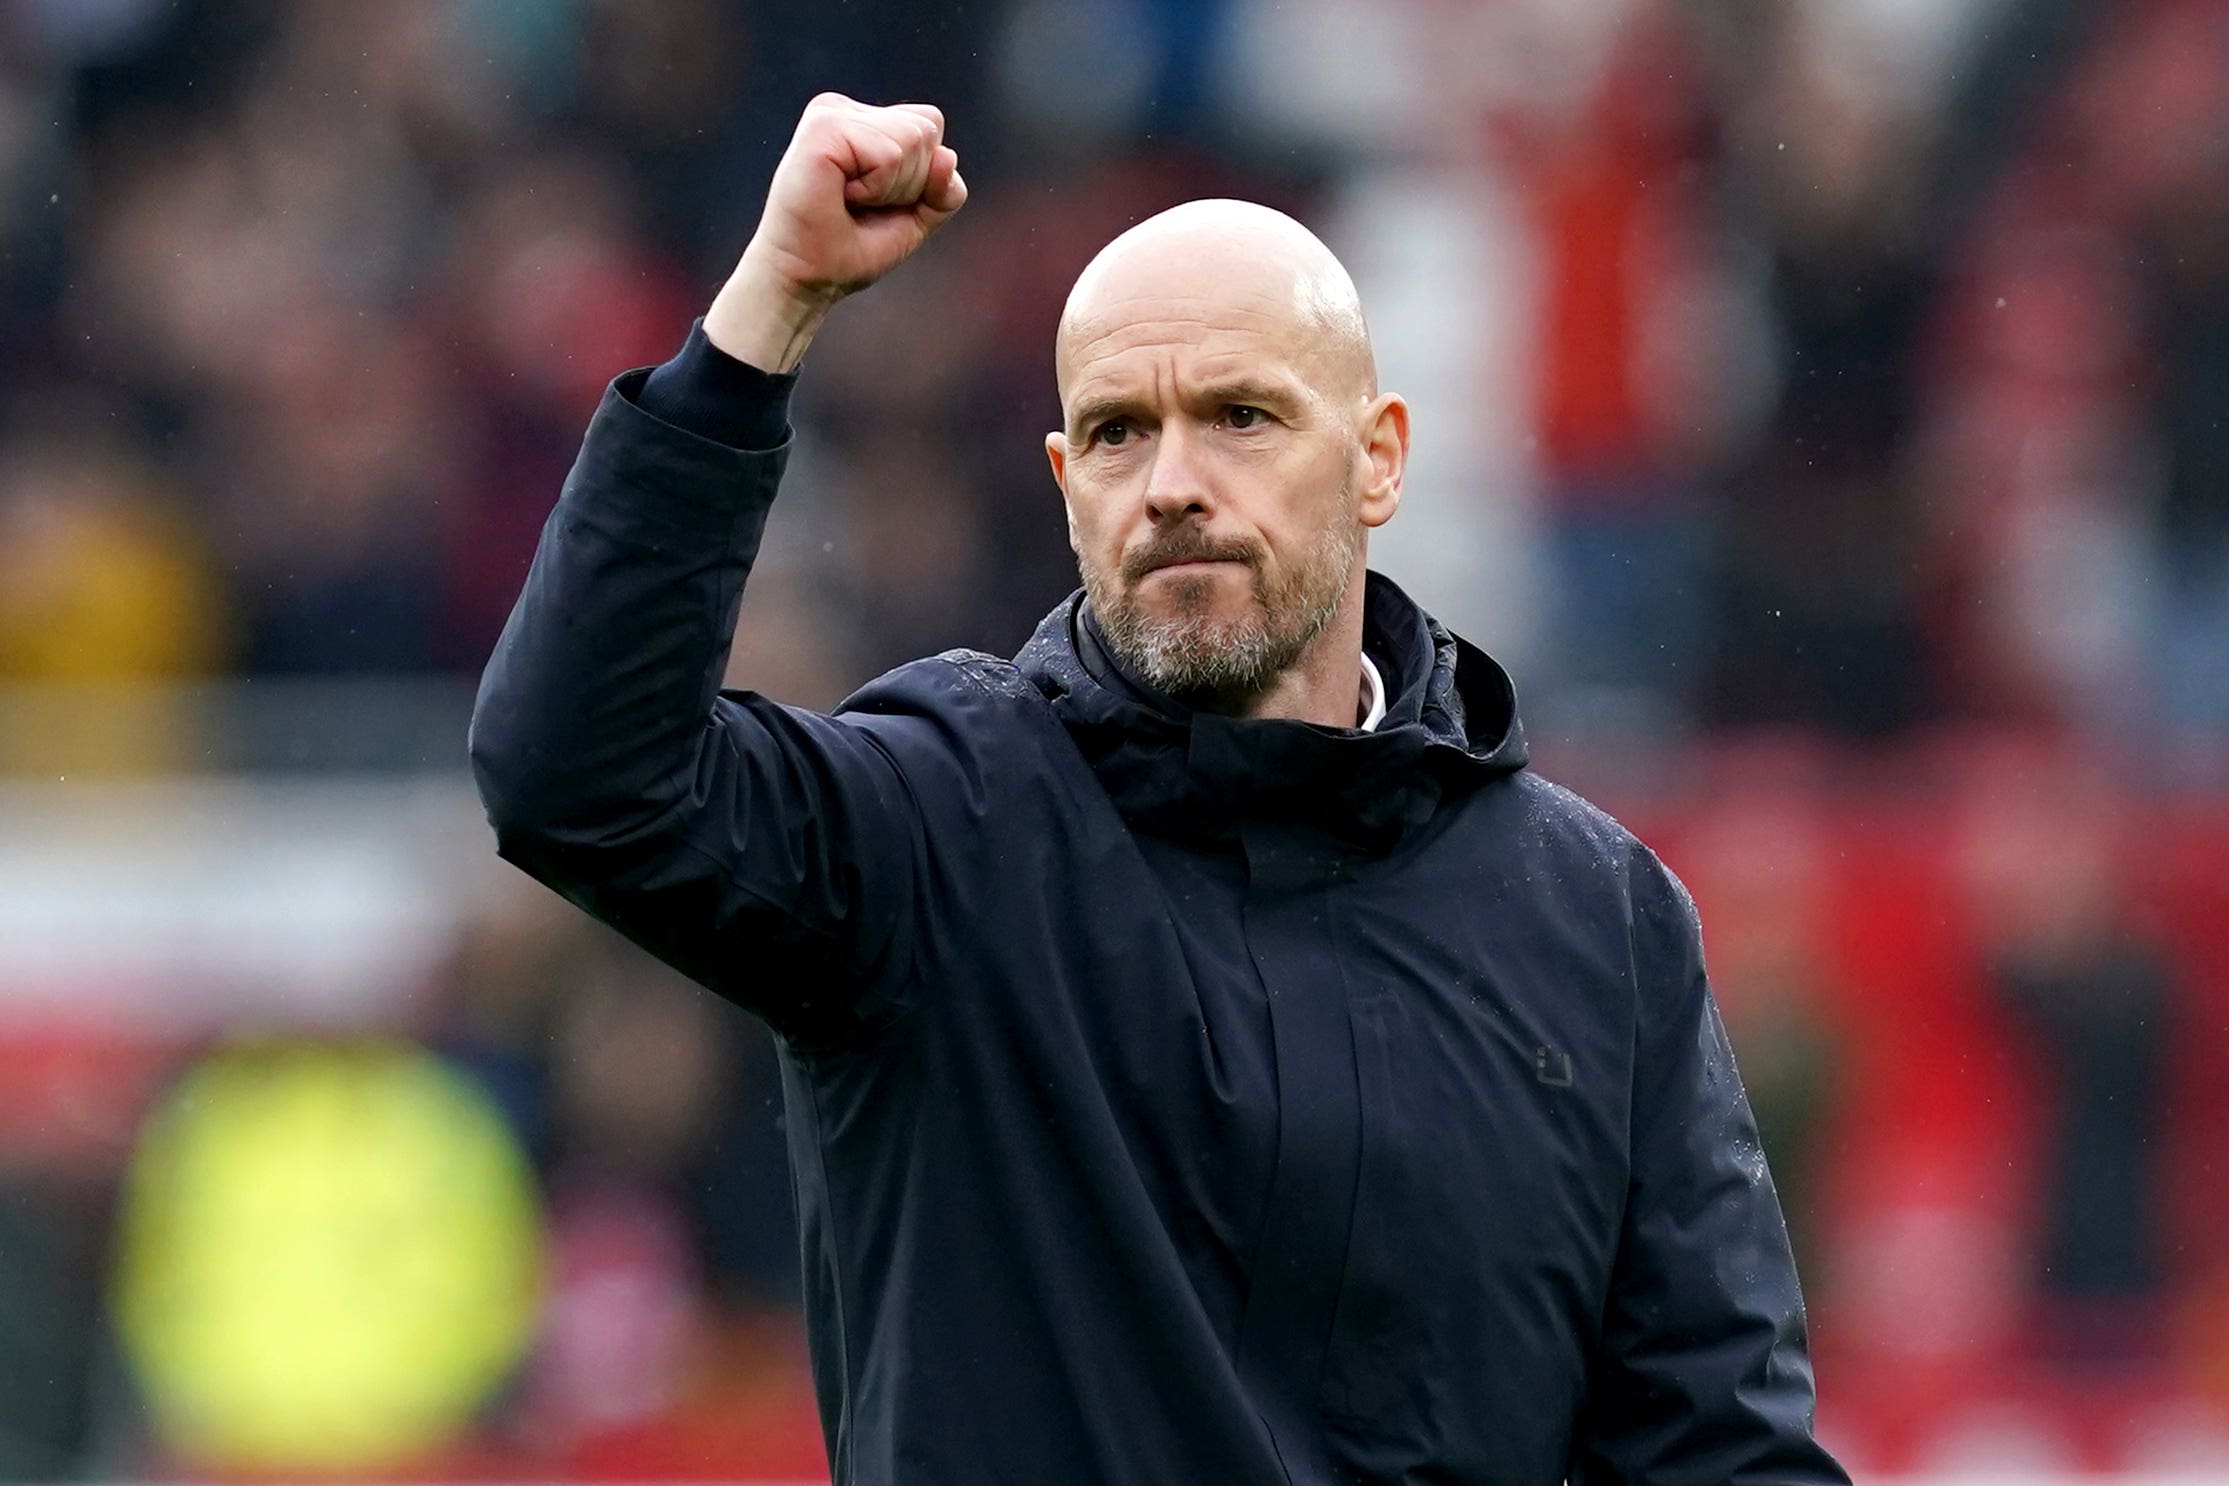  Erik ten Hag celebrates a victory with Manchester United.